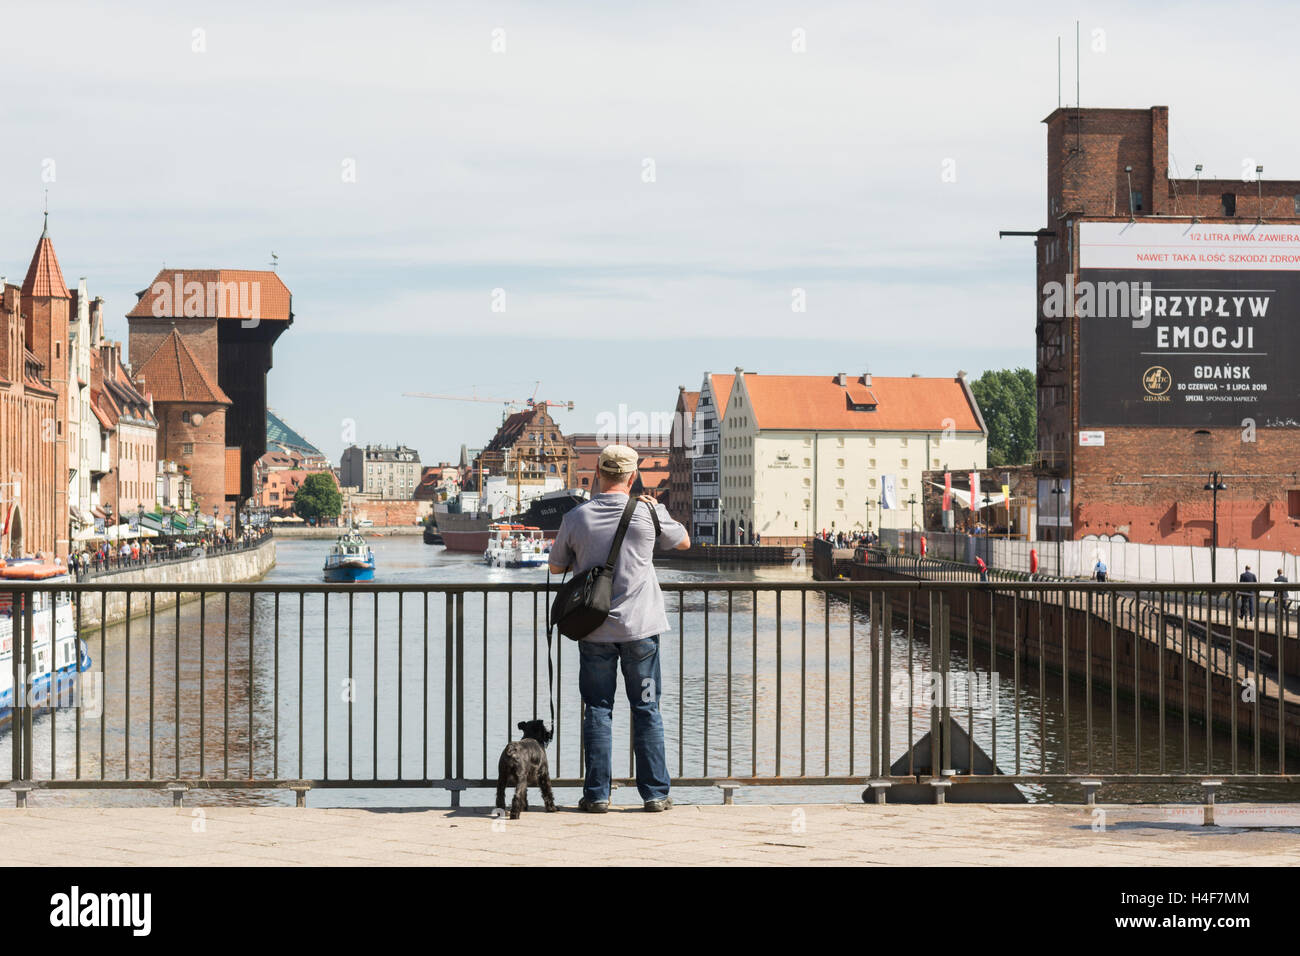 Gdansk - man taking a photograph of the classic view of Gdansk waterfront  and crane from the Green Bridge over the River Motlawa Stock Photo - Alamy